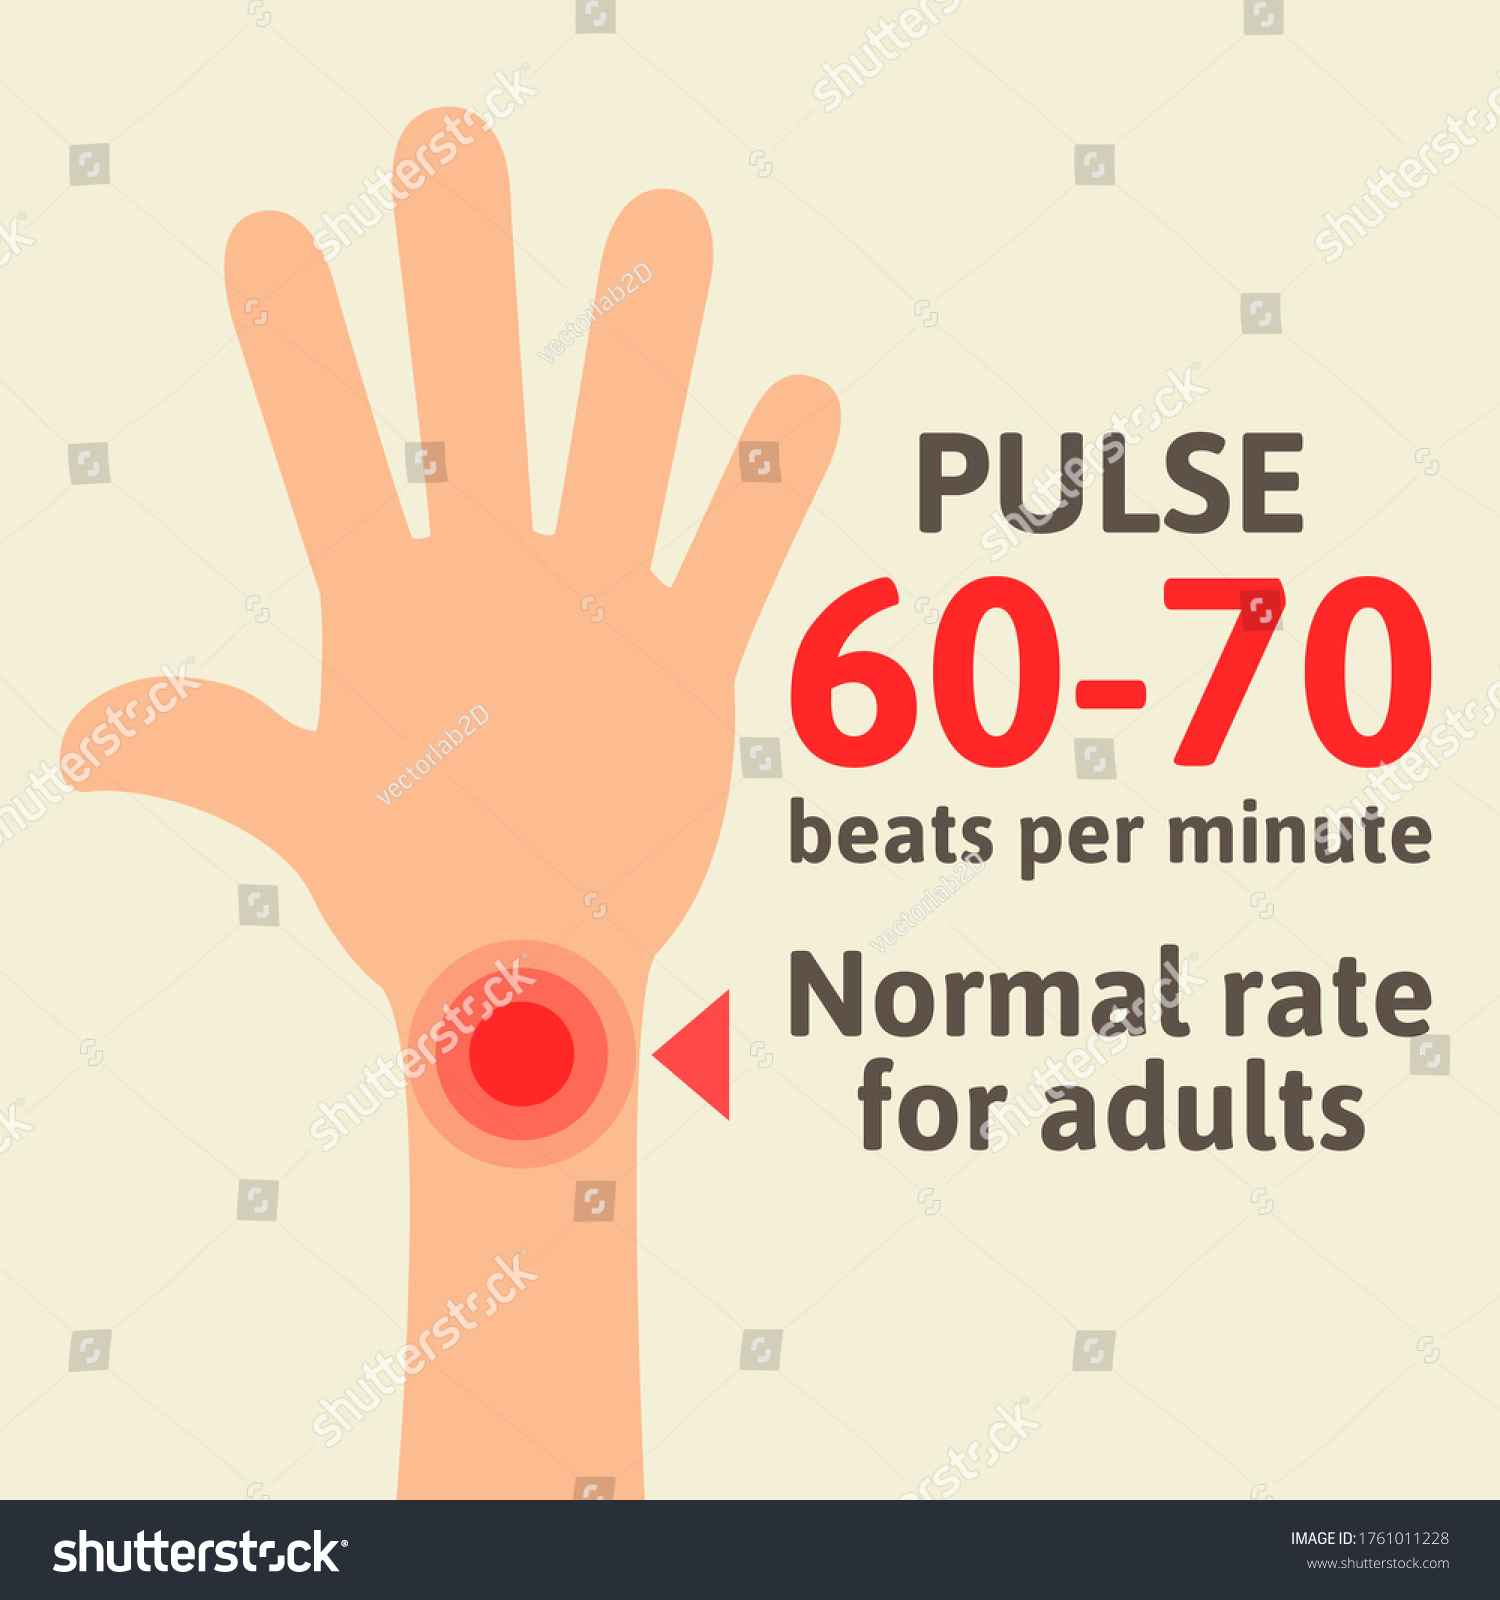 Normal pulse rate for adults